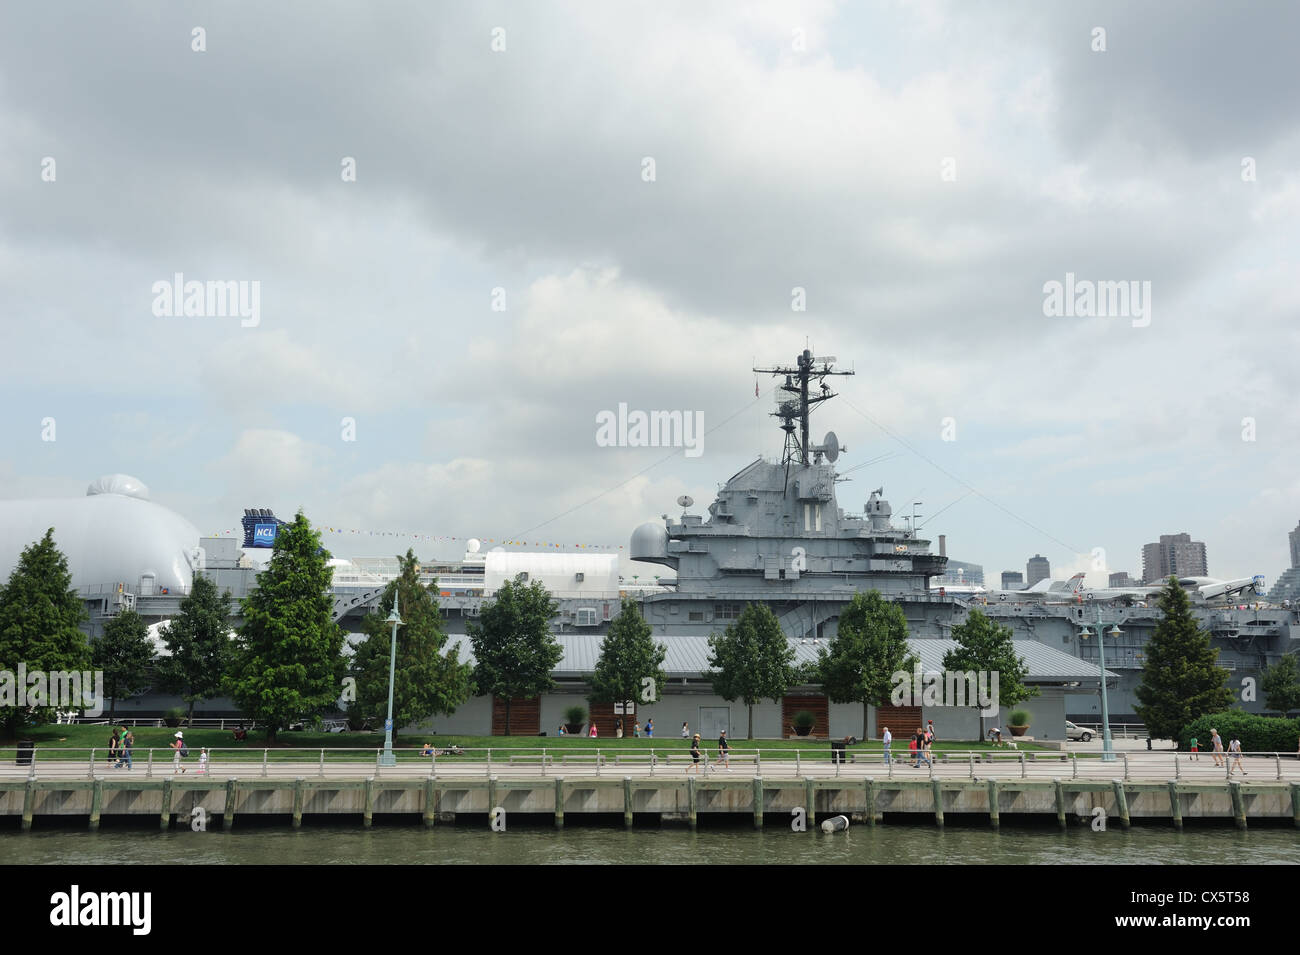 The USS Intrepid, an aircraft carrier built during World War II for the U.S. Navy, is now on exhibit in midtown Manhattan. Stock Photo